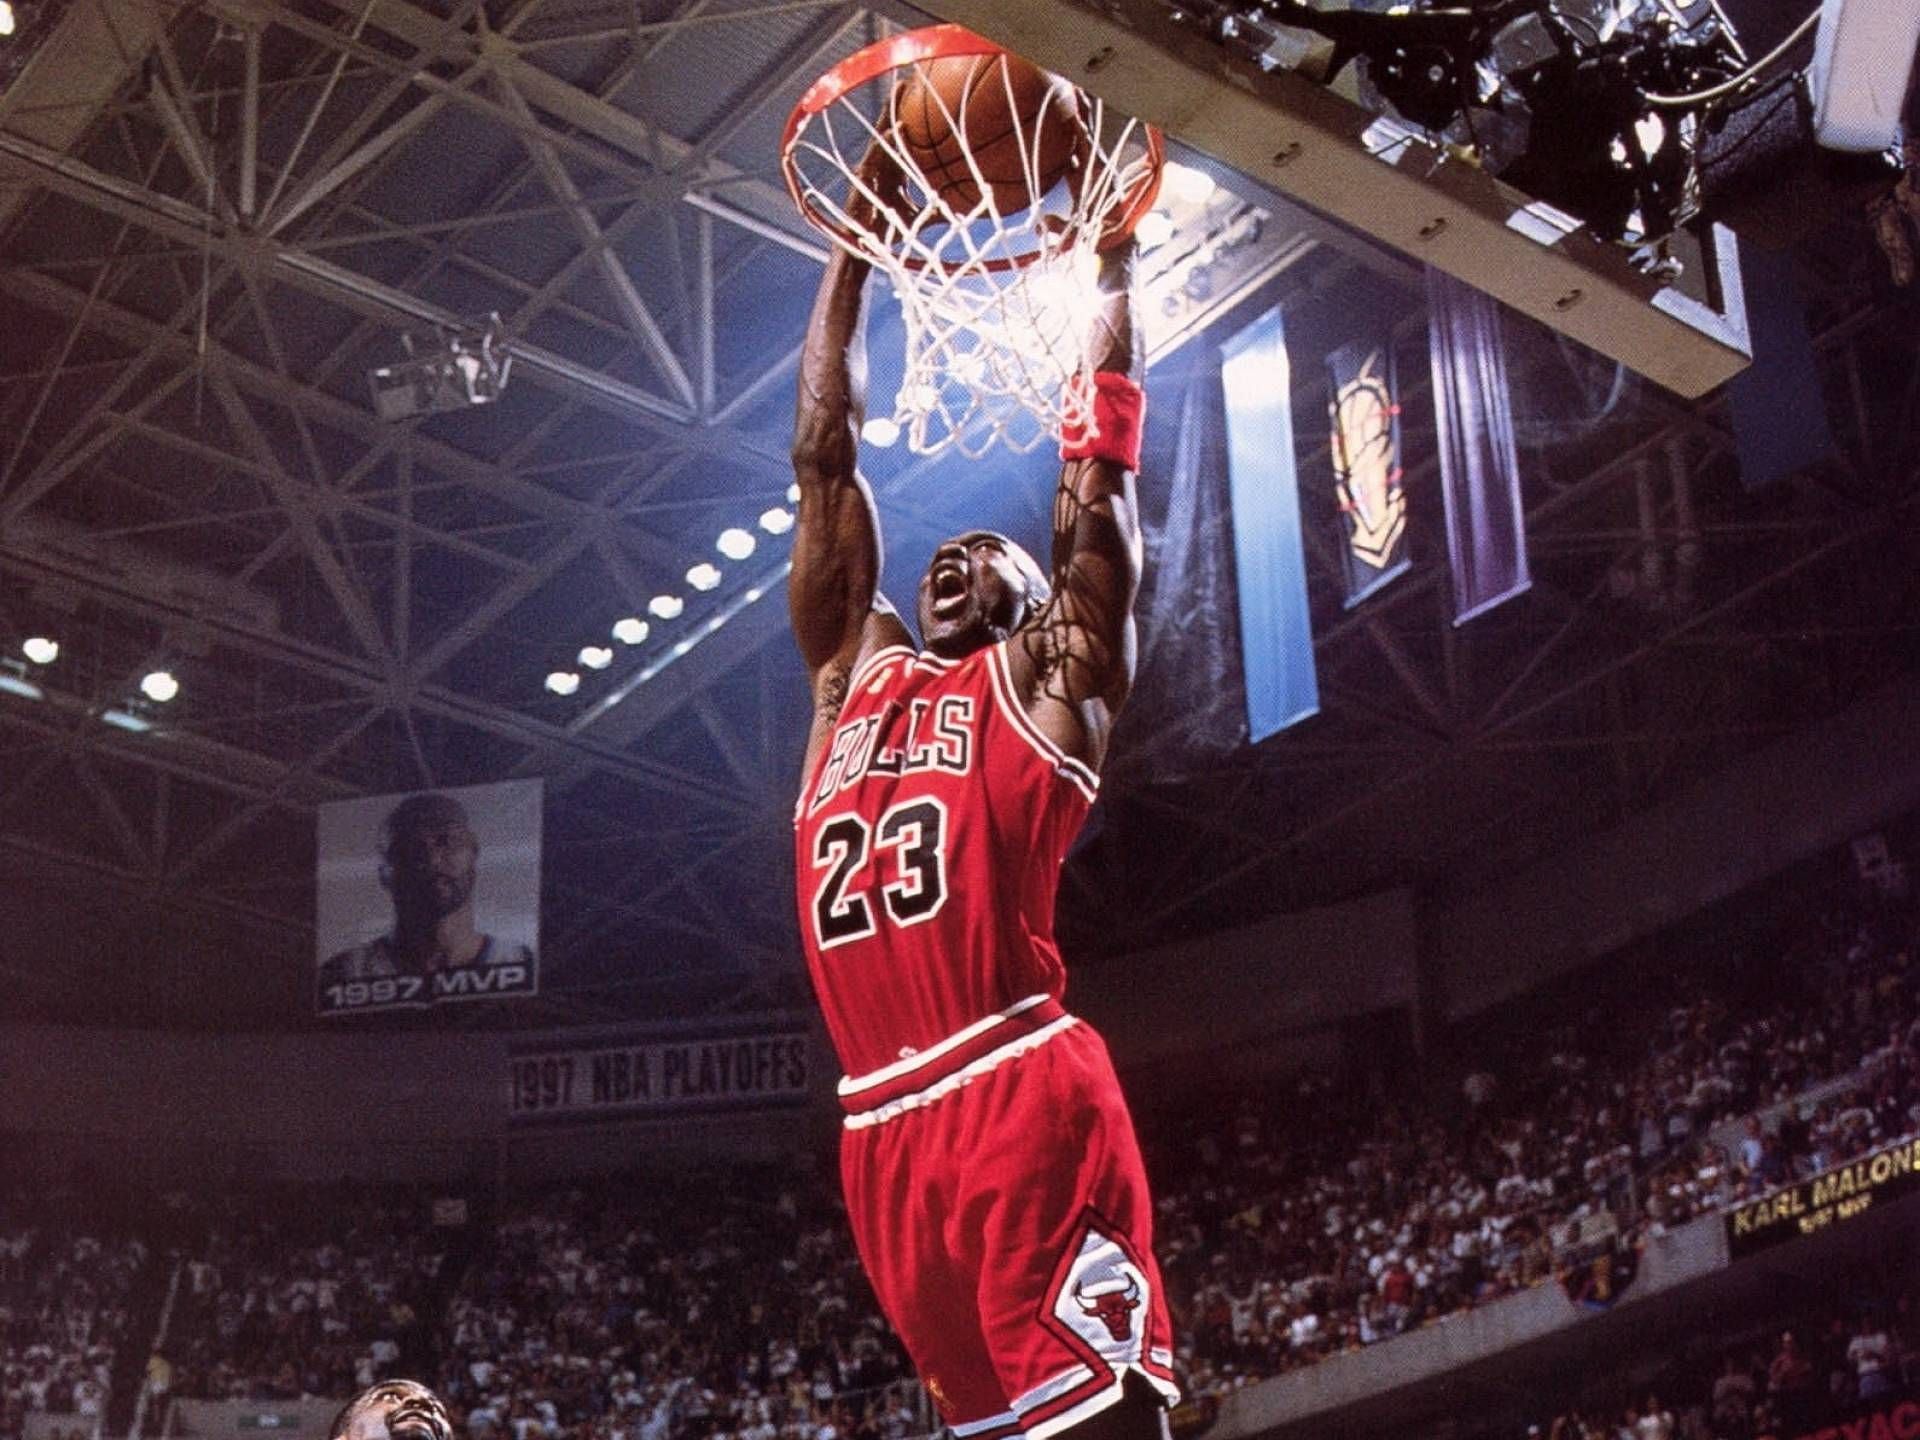 On this day in 1992, Michael Jordan scored 57 on the Washington Bullets.